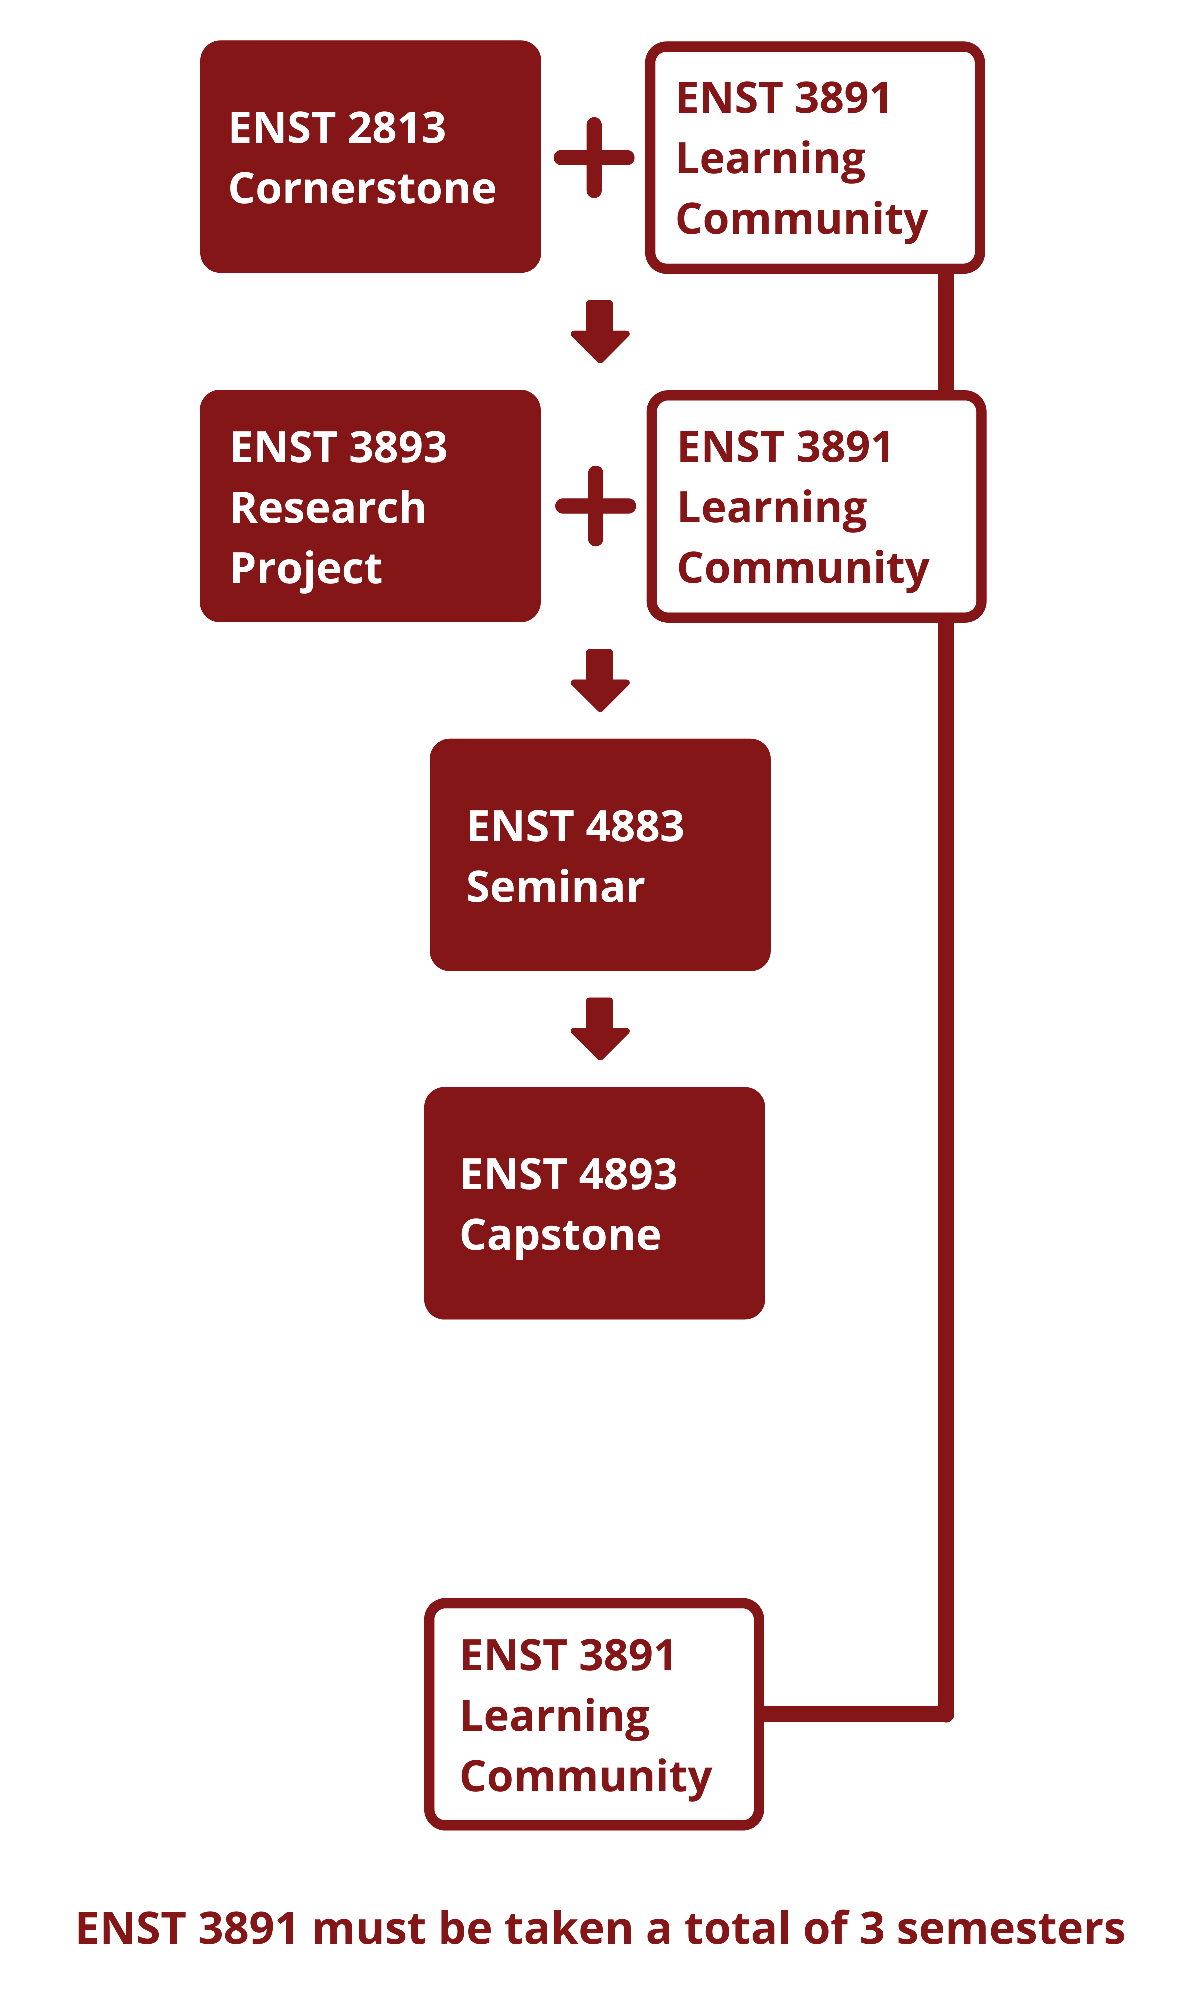 The Environmental Studies Core Course flow chart. Majors must take the core sequence in order. ENST 3891: Environmental Studies Learning Community is a one-hour course repeated over three semesters, concurrently with ENST 2813, ENST 3893, and one other semester.ENST 2813 Cornerstone + ENST 3891 Learning Community are at the top. An arrow points down to the next level, which includes ENST 3893 Research Project + ENST 3891 Learning Community. Another arrow points down to ENST 4883 Seminar, and another arrow points to ENST 4893 Capstone. Below All this, ENST 3891 Learning Community is displayed again. The label for the whole table is ENST 3891 Learning Community.